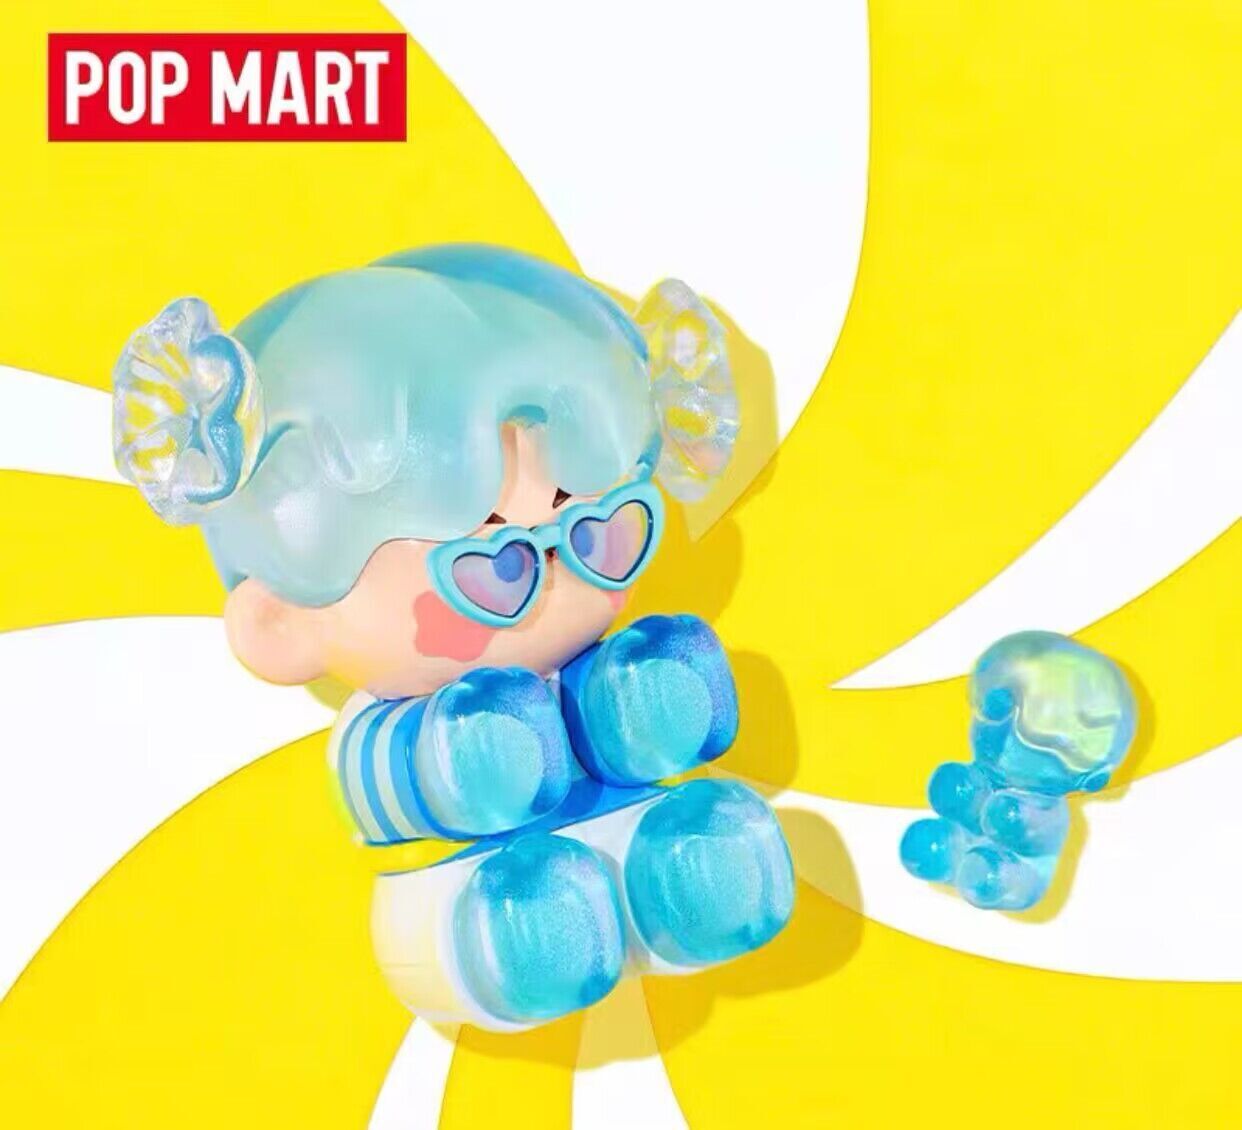 POP MART Pino Jelly Taste & Personality Quiz Series Blind Box Confirm Figure toy